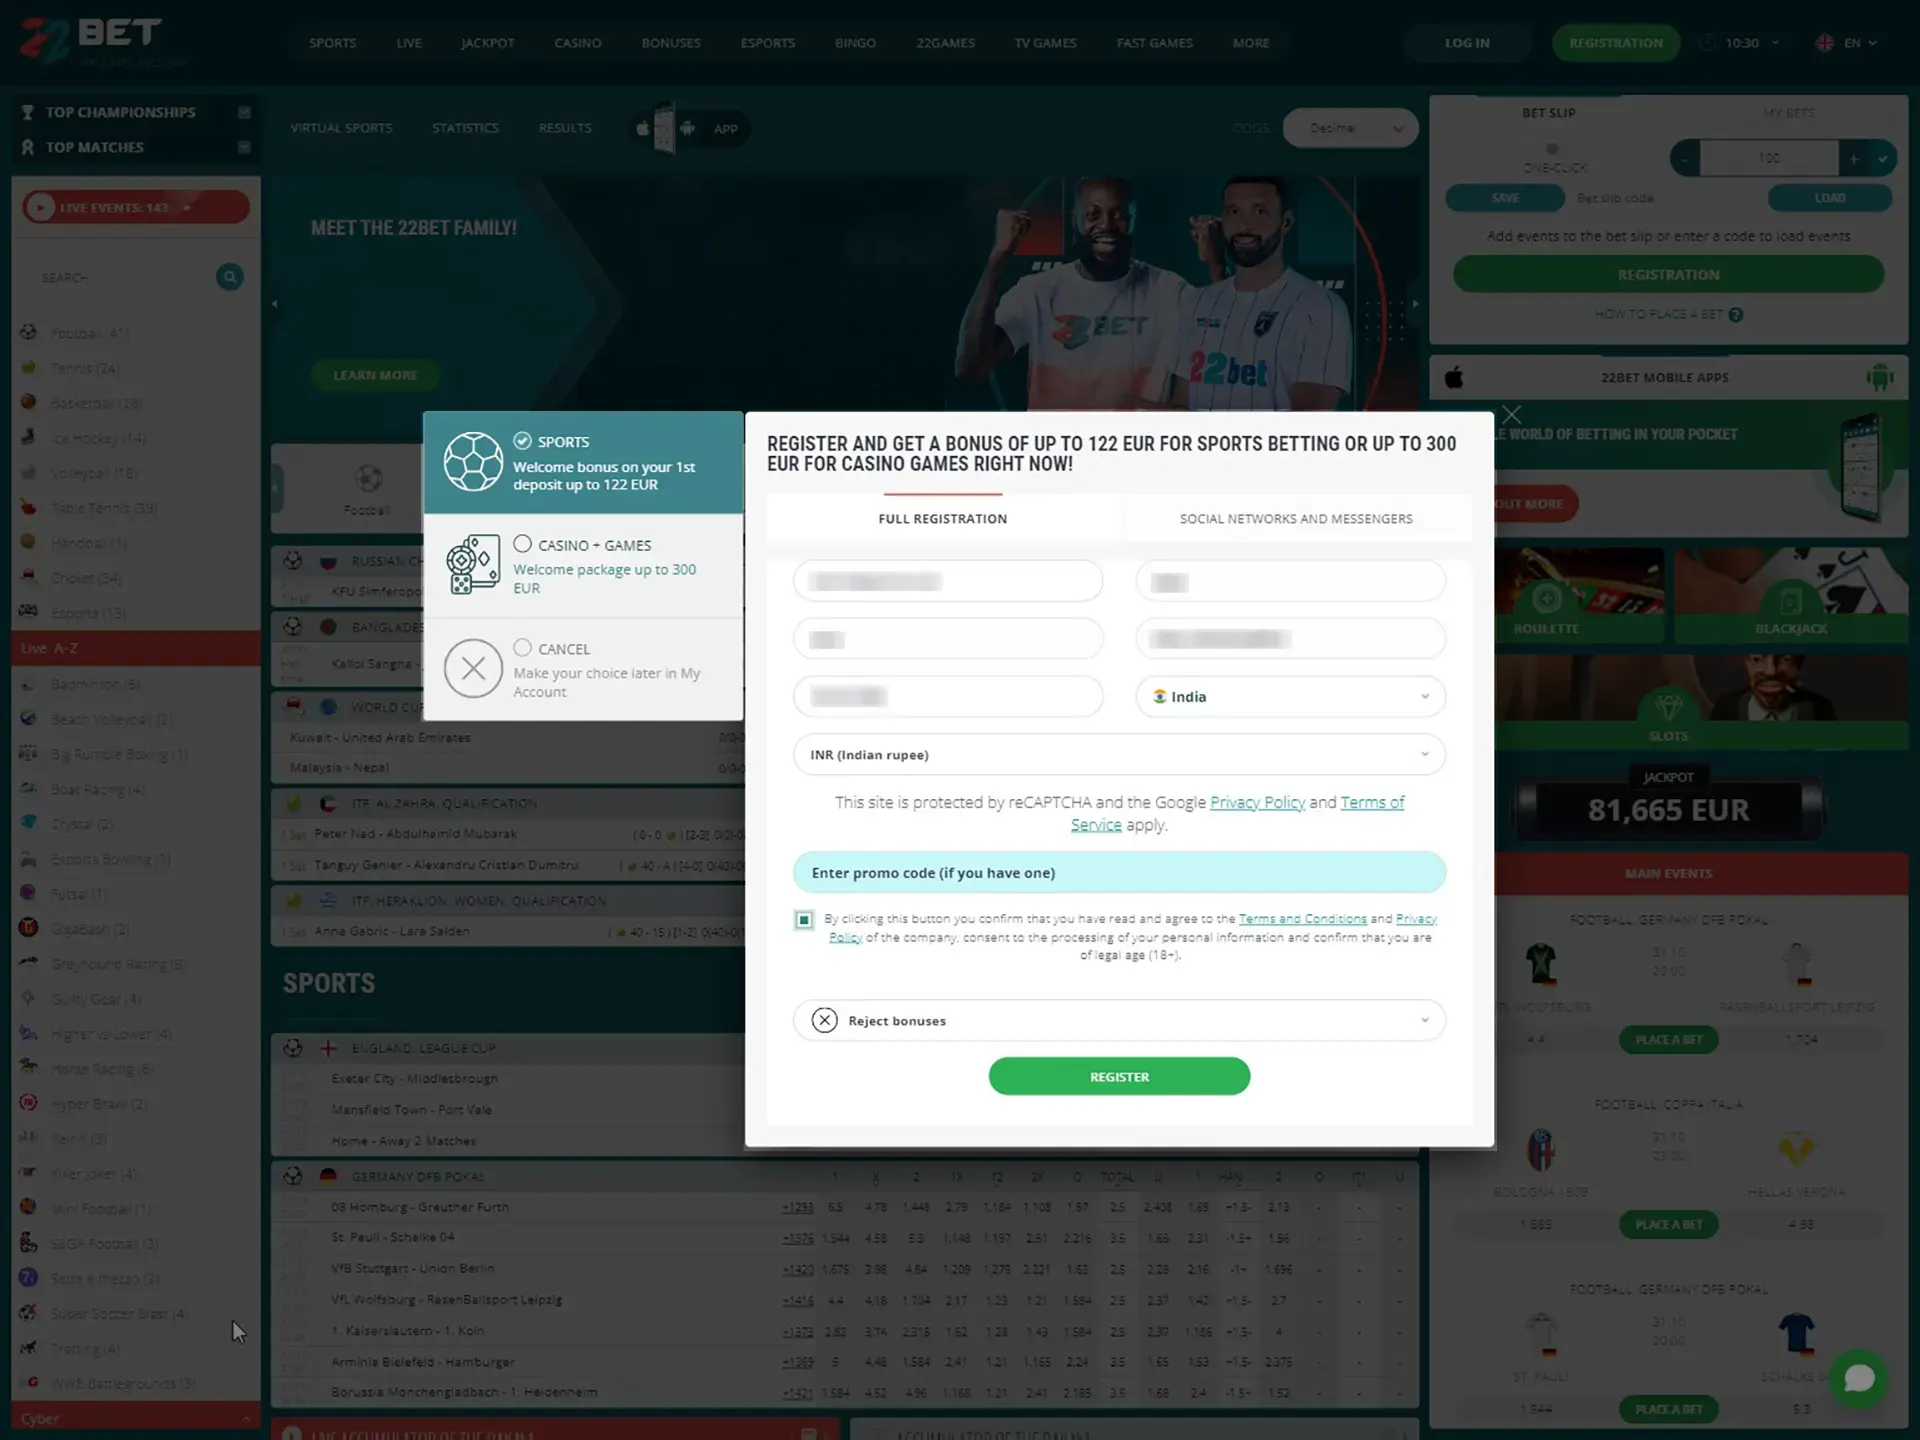 After registering on the 22Bet website, log in to your personal account.